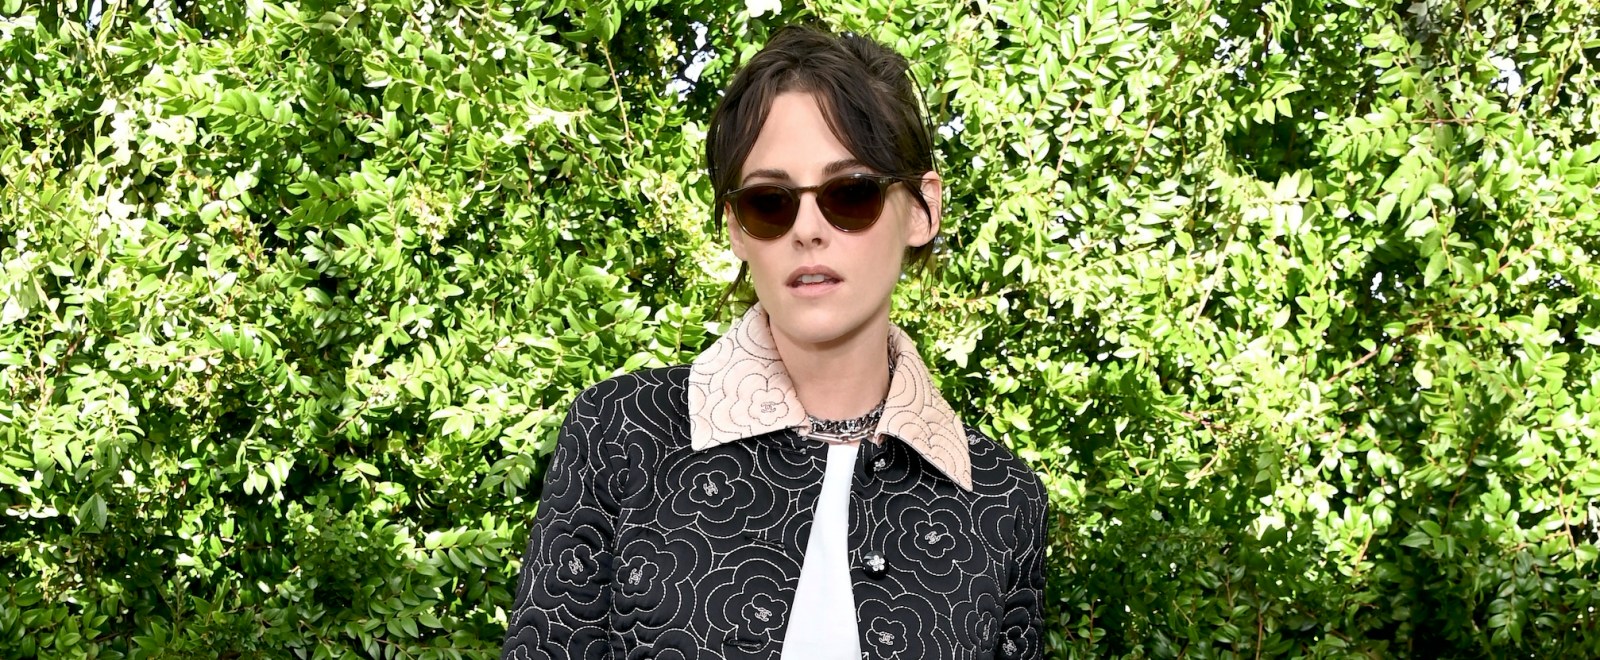 Kristen Stewart Had A Short But Blunt Response To ‘Homophobic’ Haters Of Her ‘Rolling Stone’ Cover: ‘F*ck You’